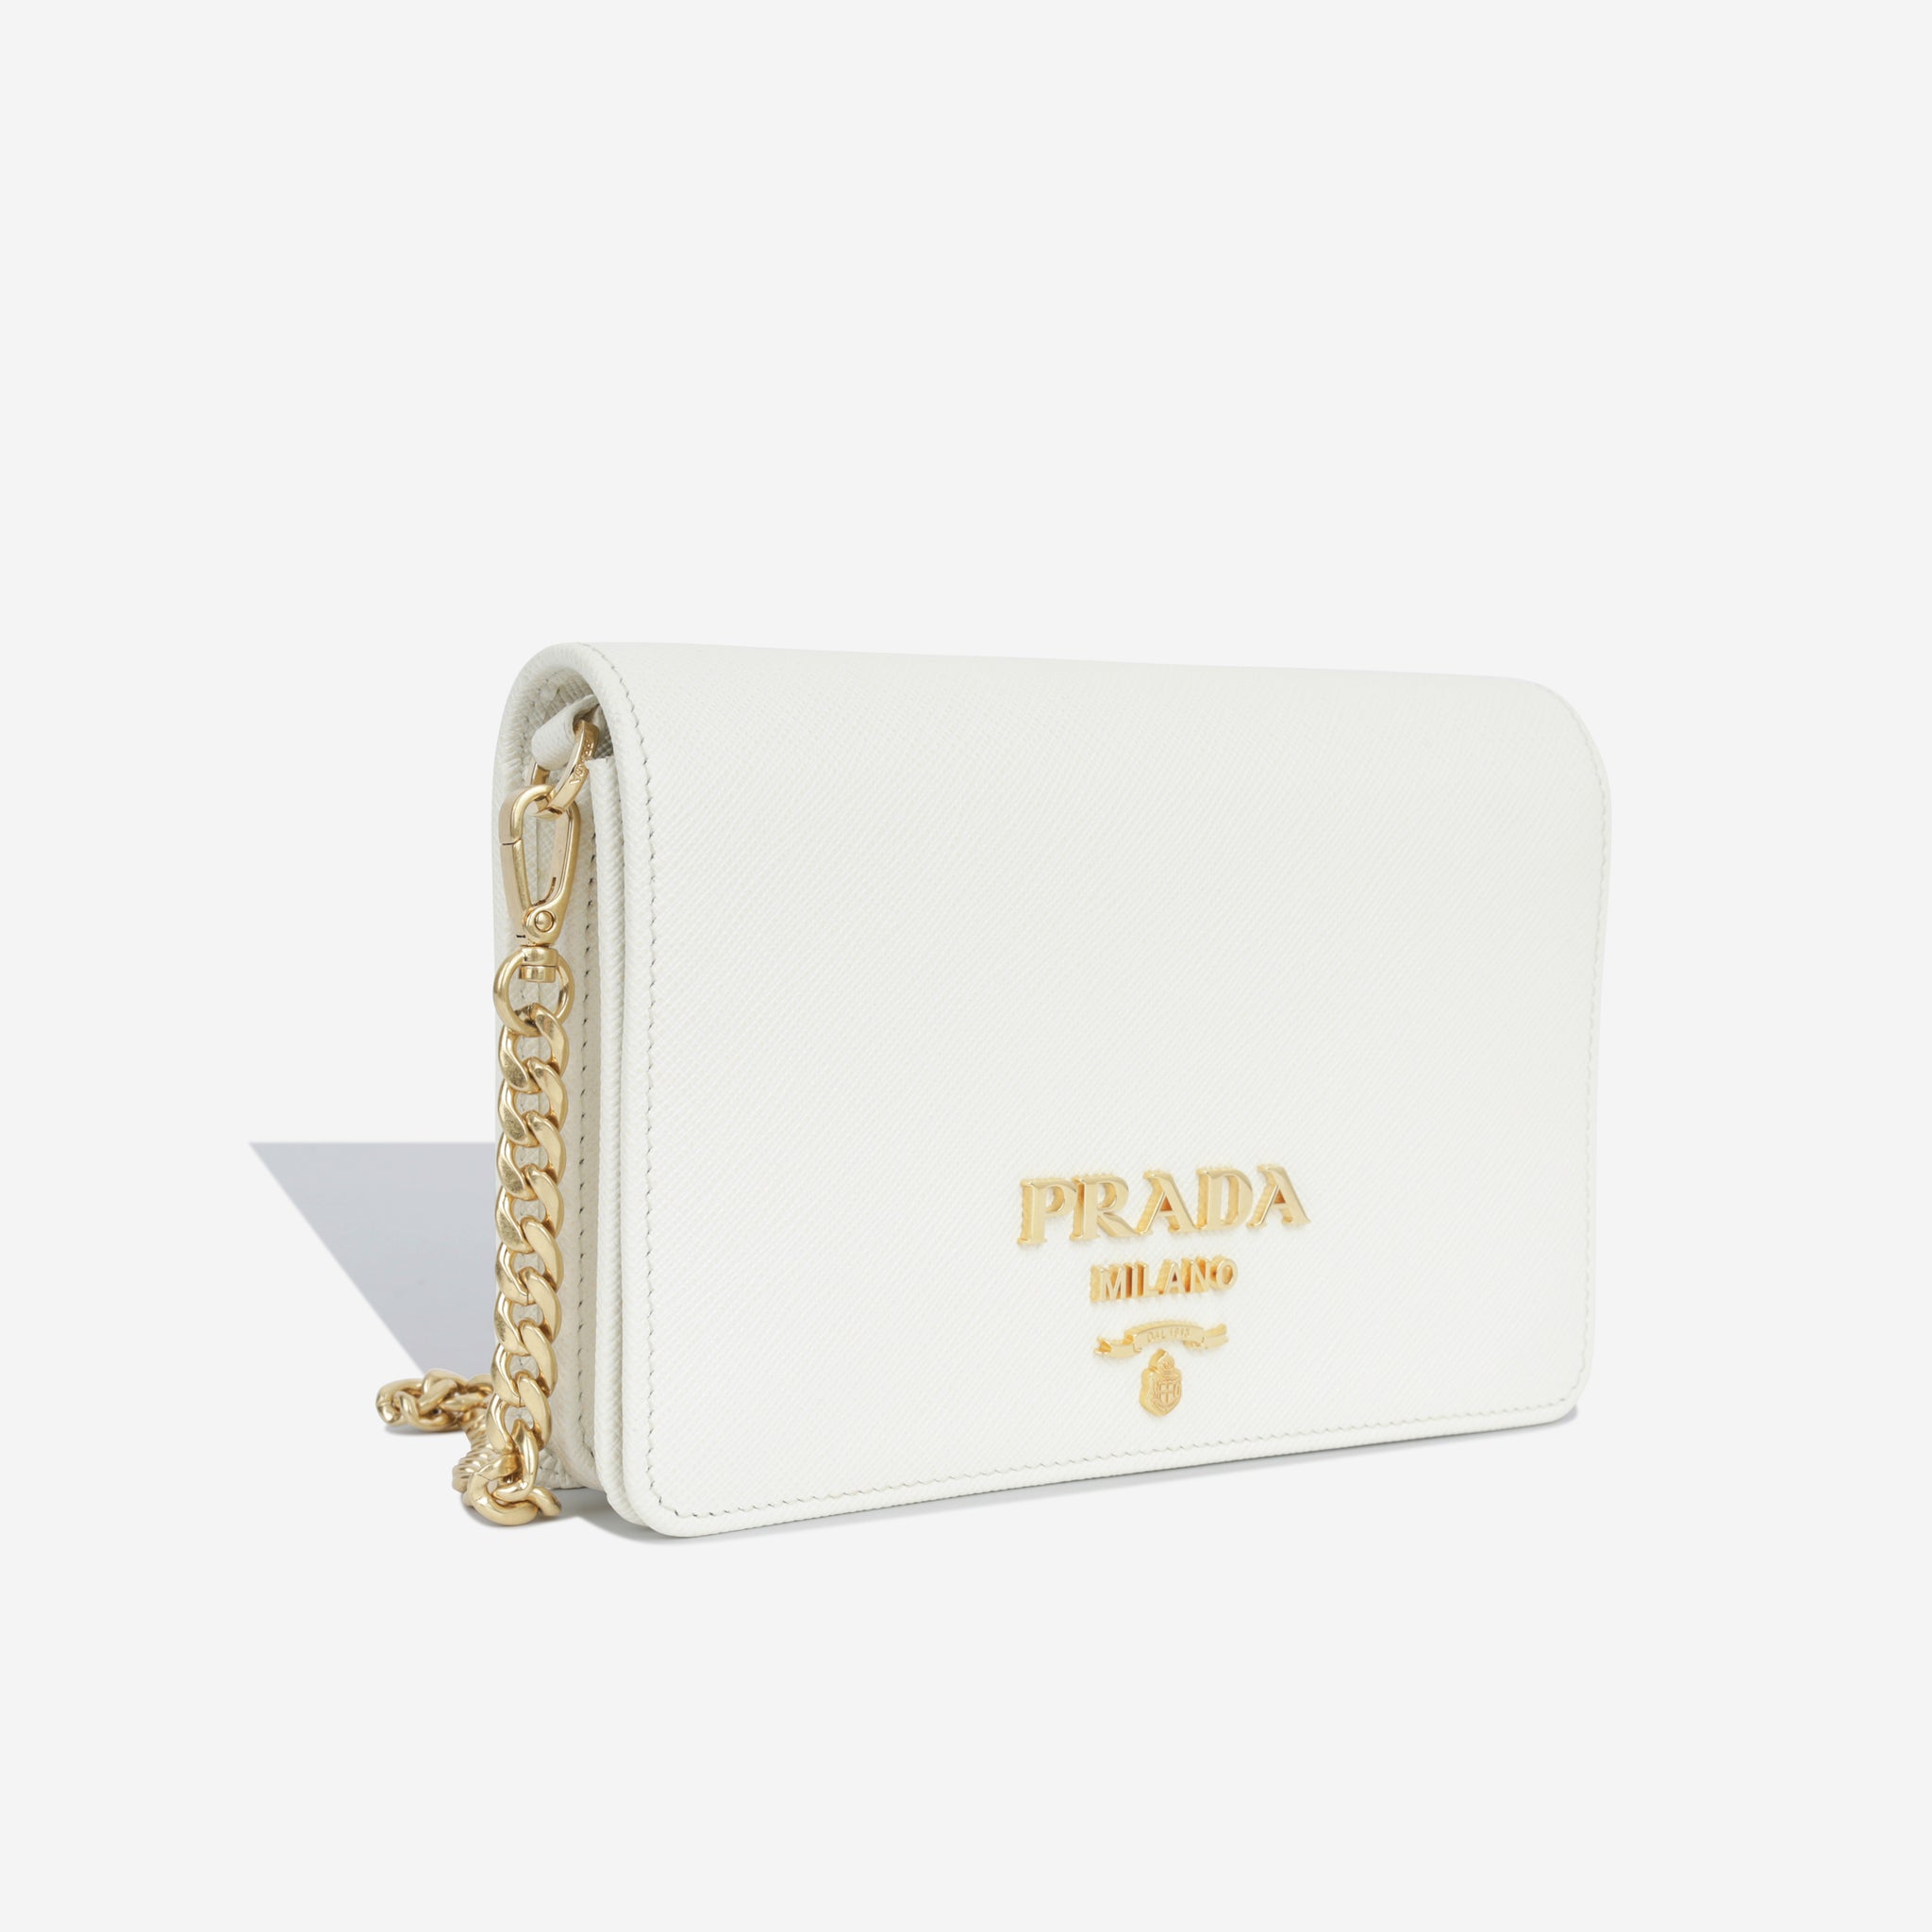 PRADA Saffiano long wallet in white leather